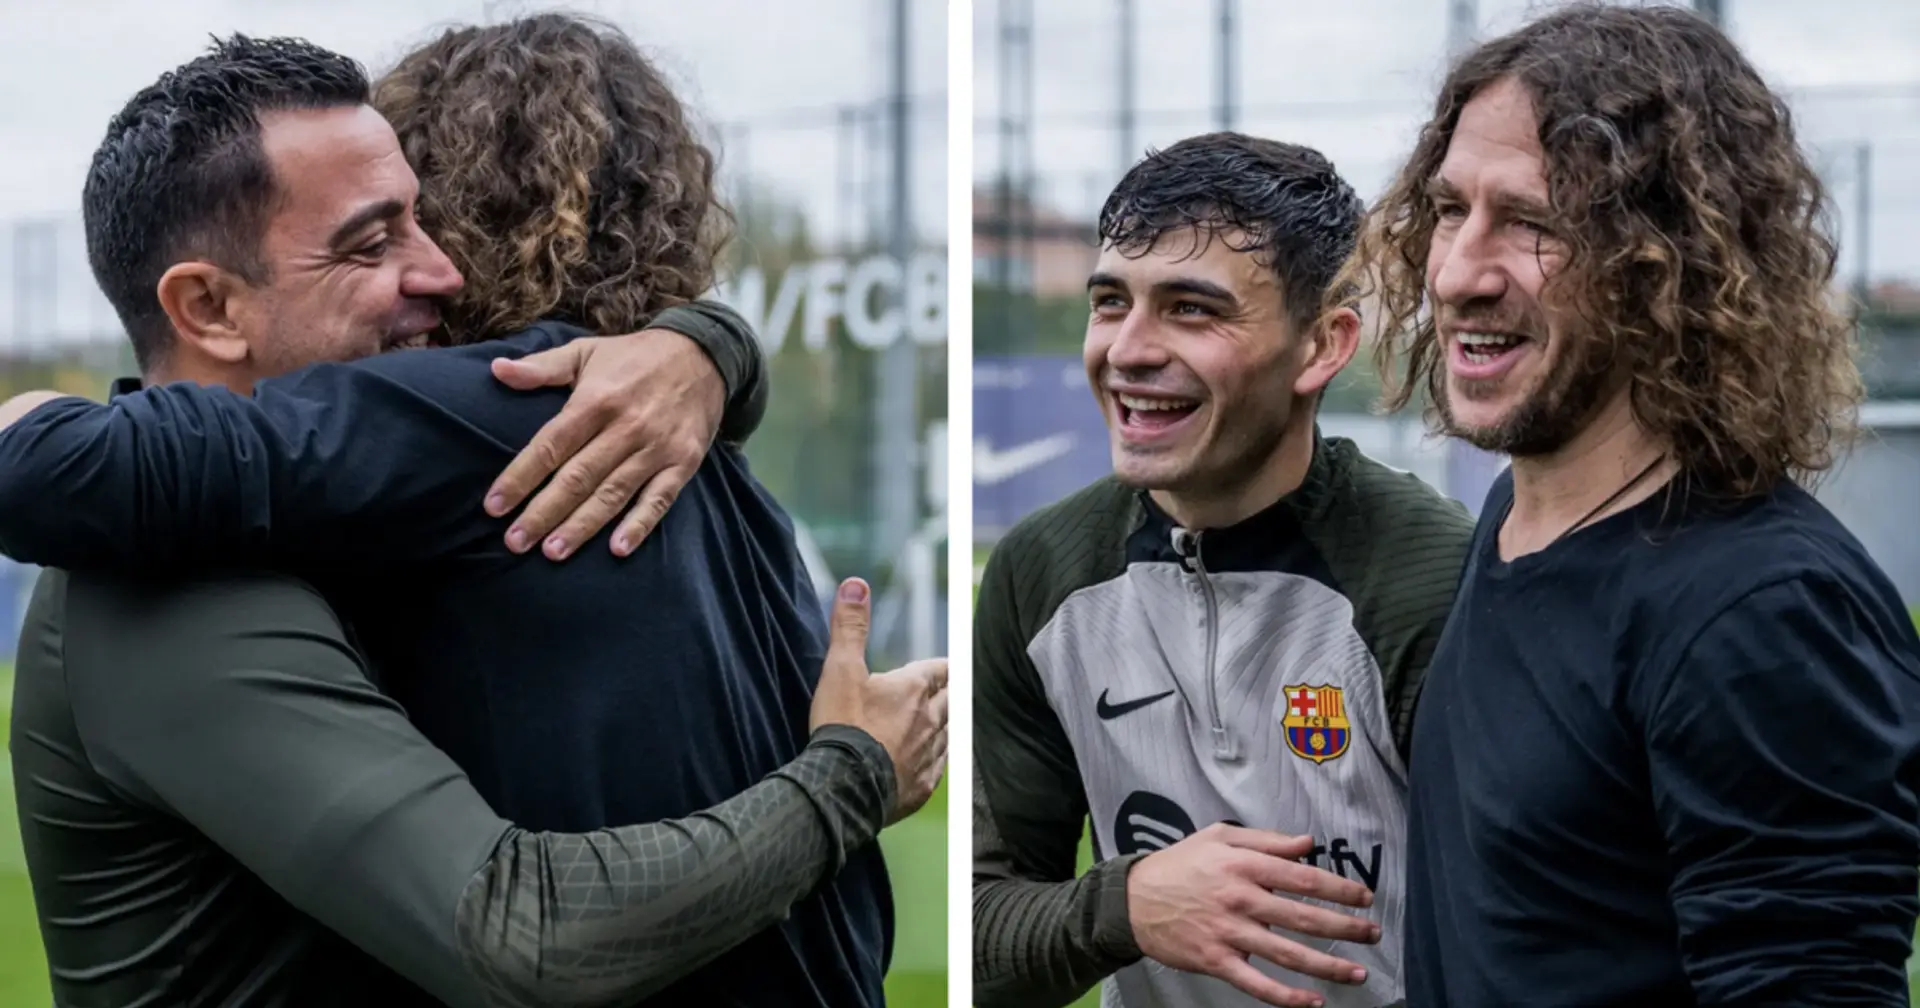 10 best pics from Barca's latest training session – including Carles Puyol